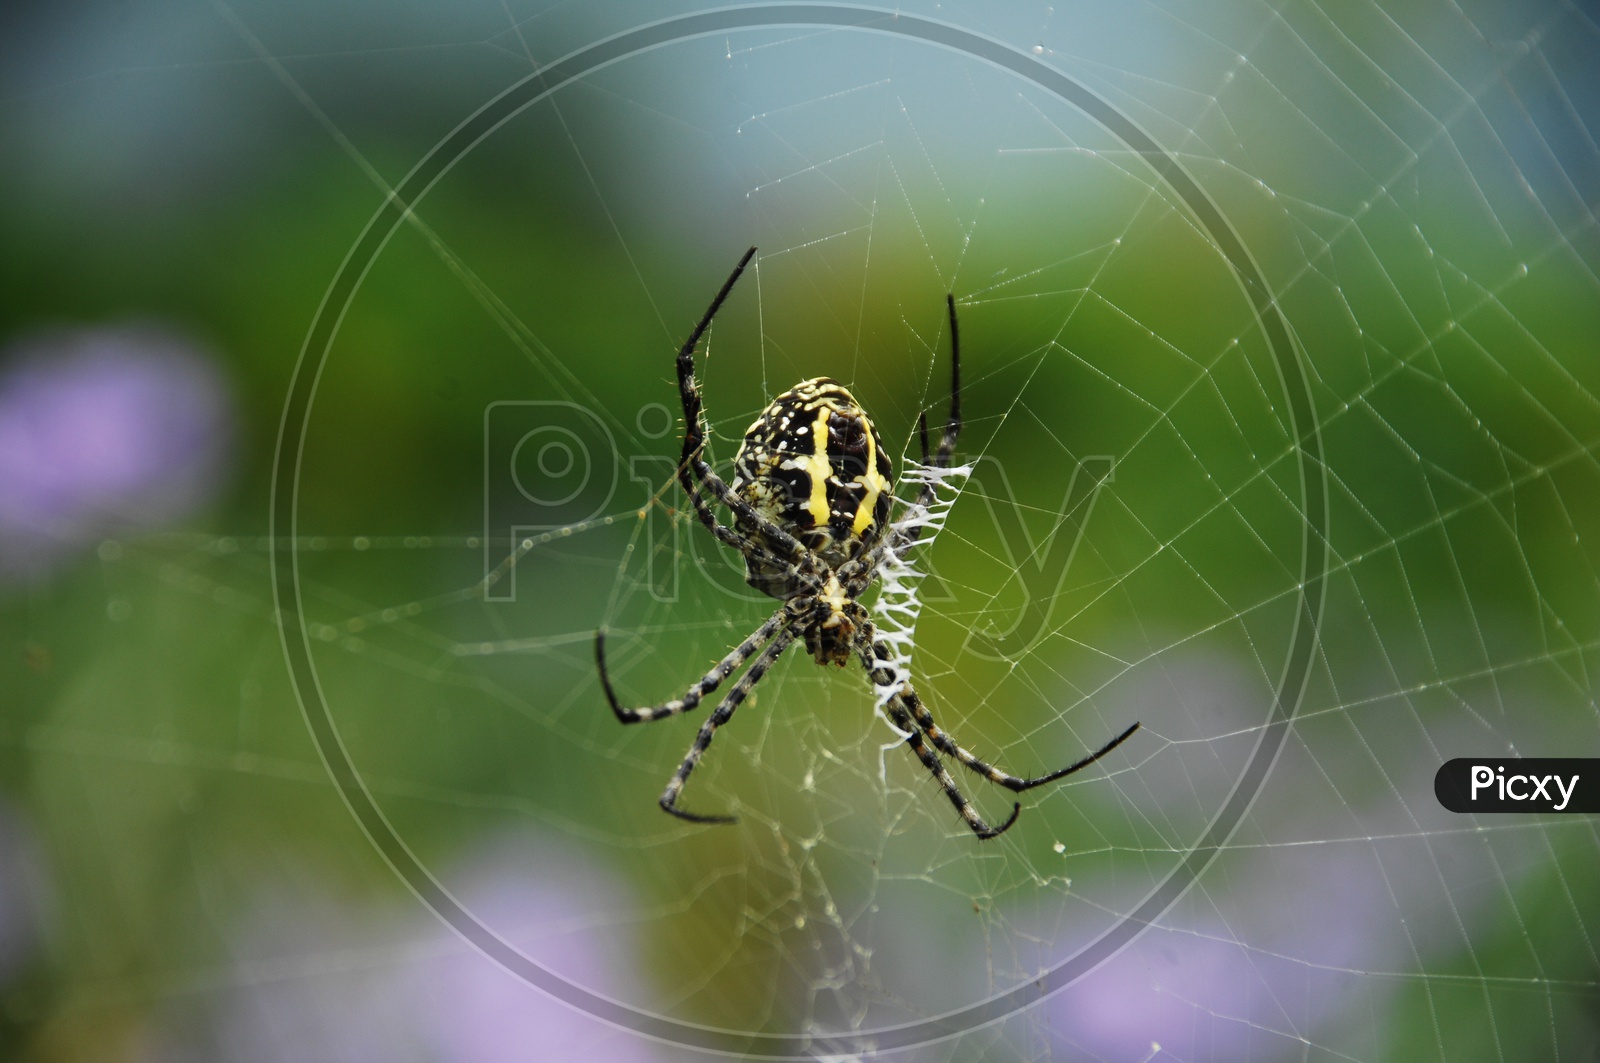 A Spider weaving a web